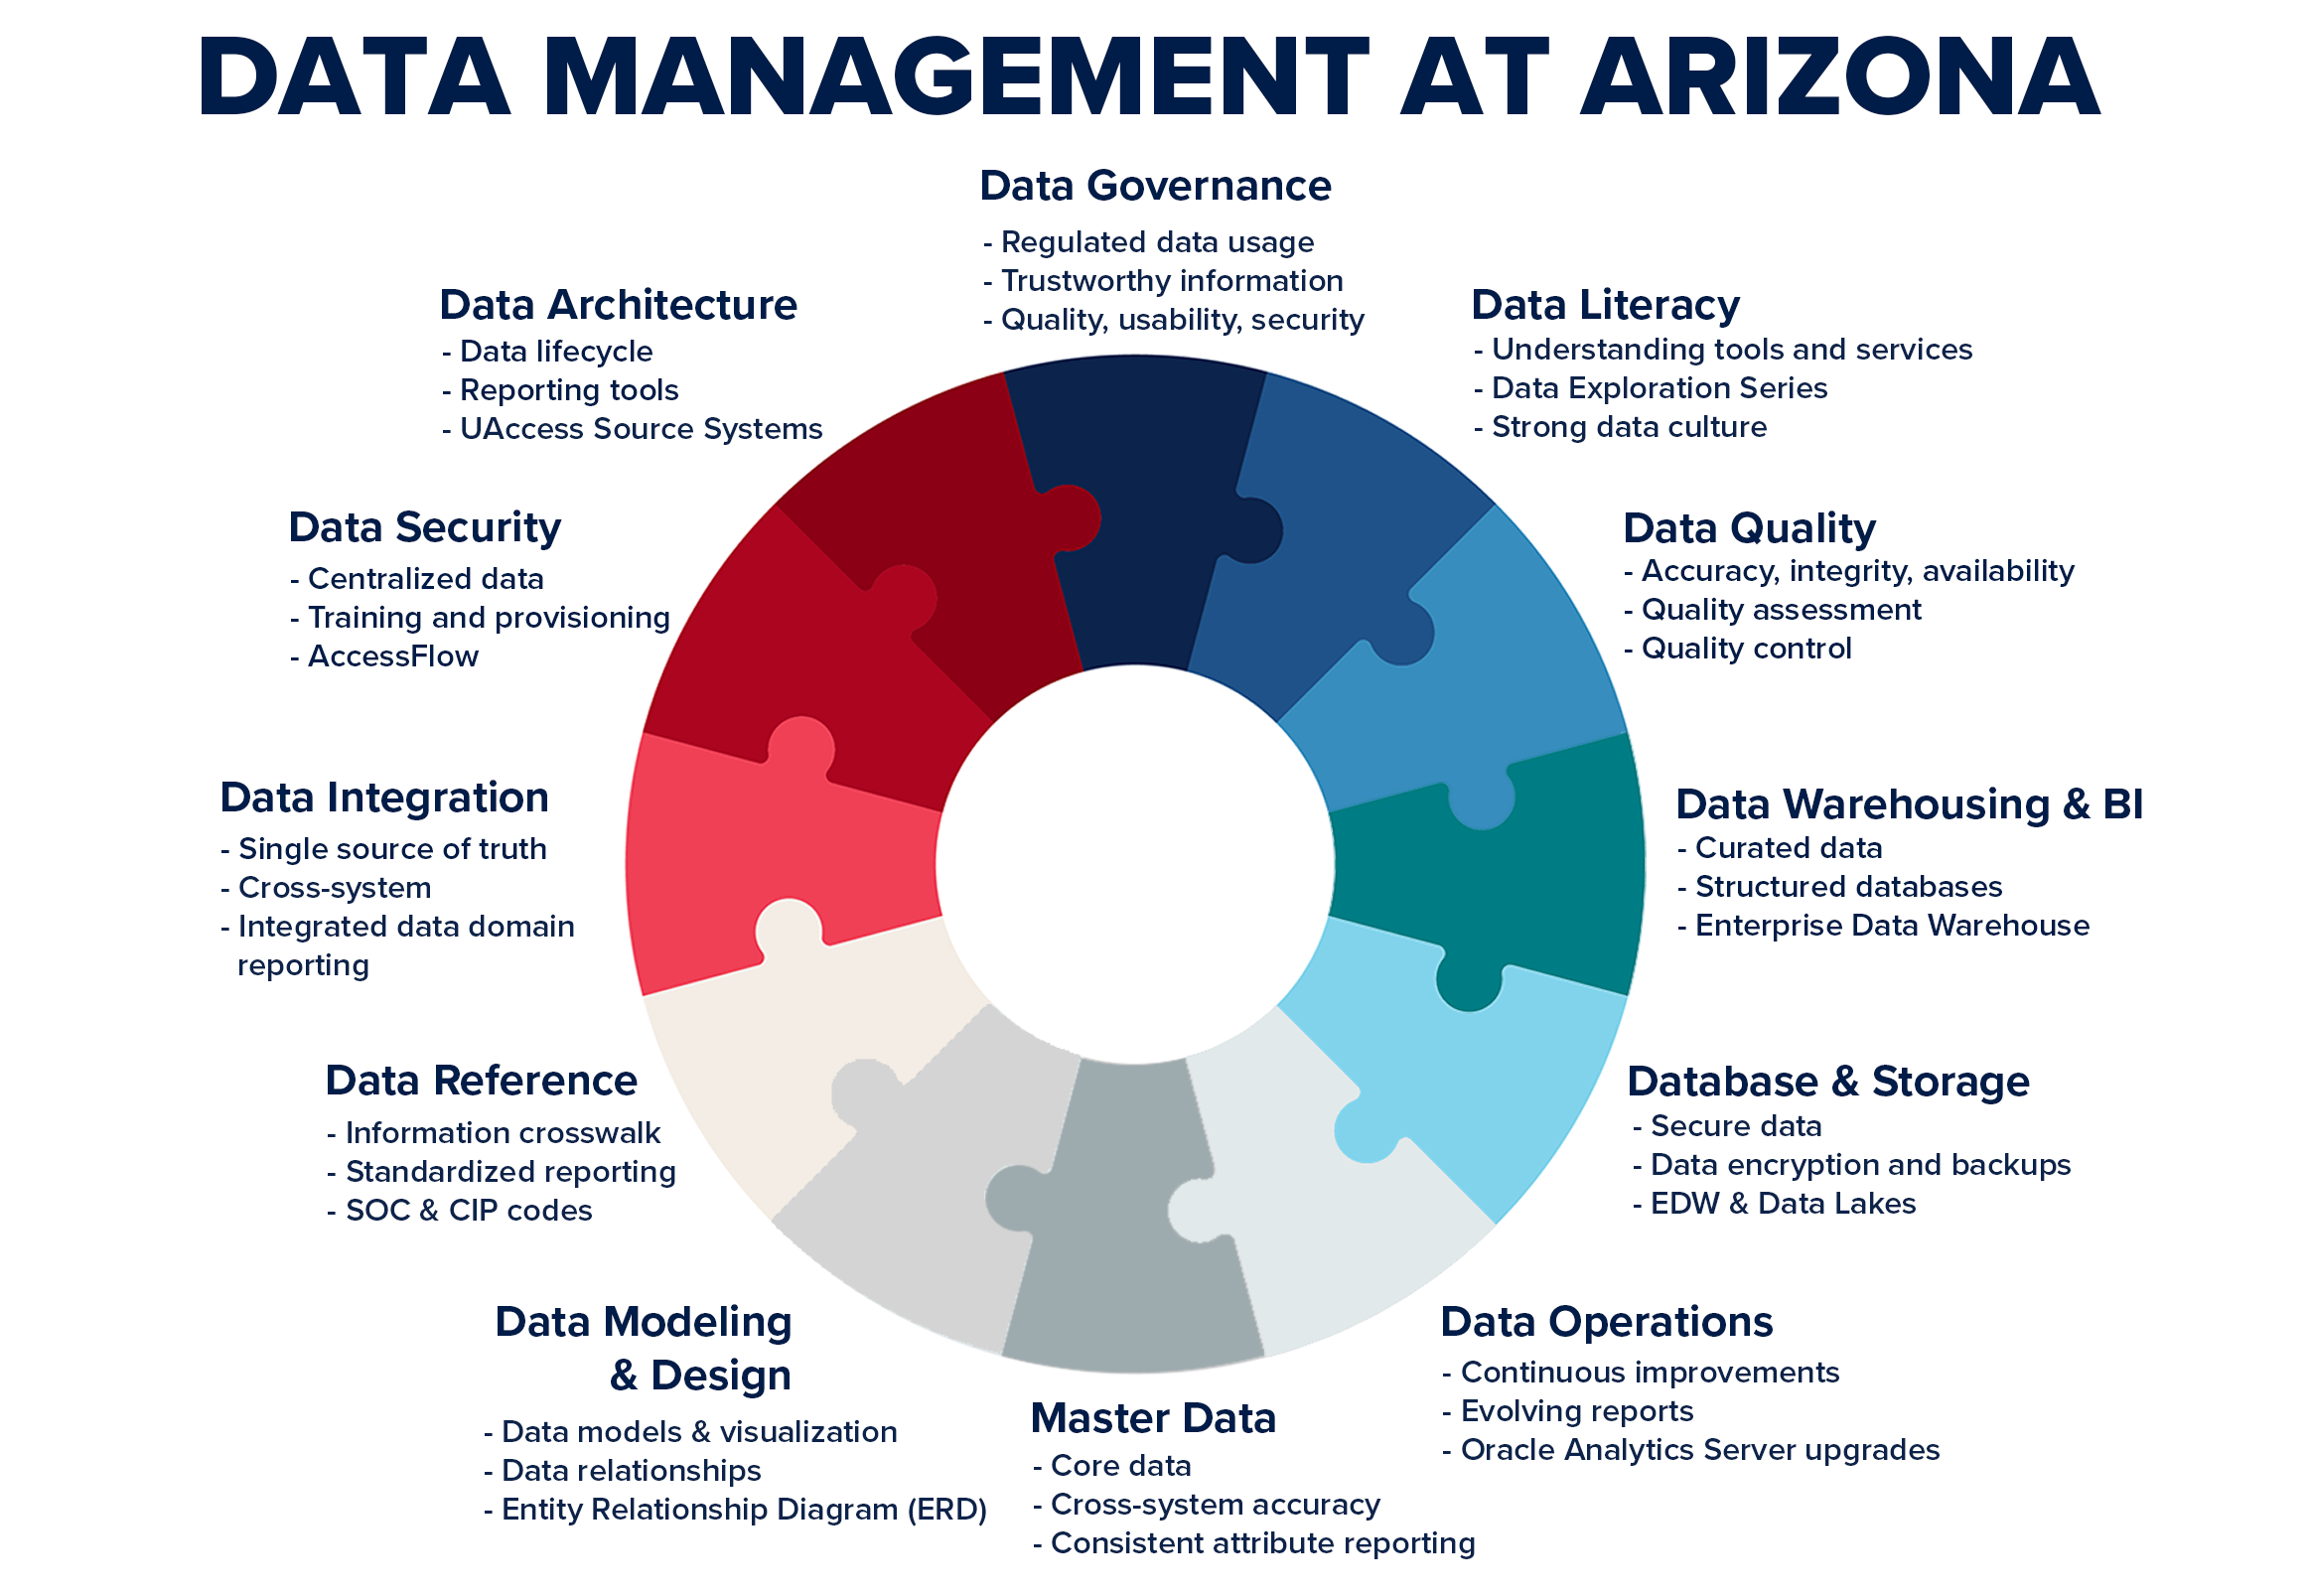 12 piece puzzle wheel using university brand colors that highlights each of the 12 data management practices